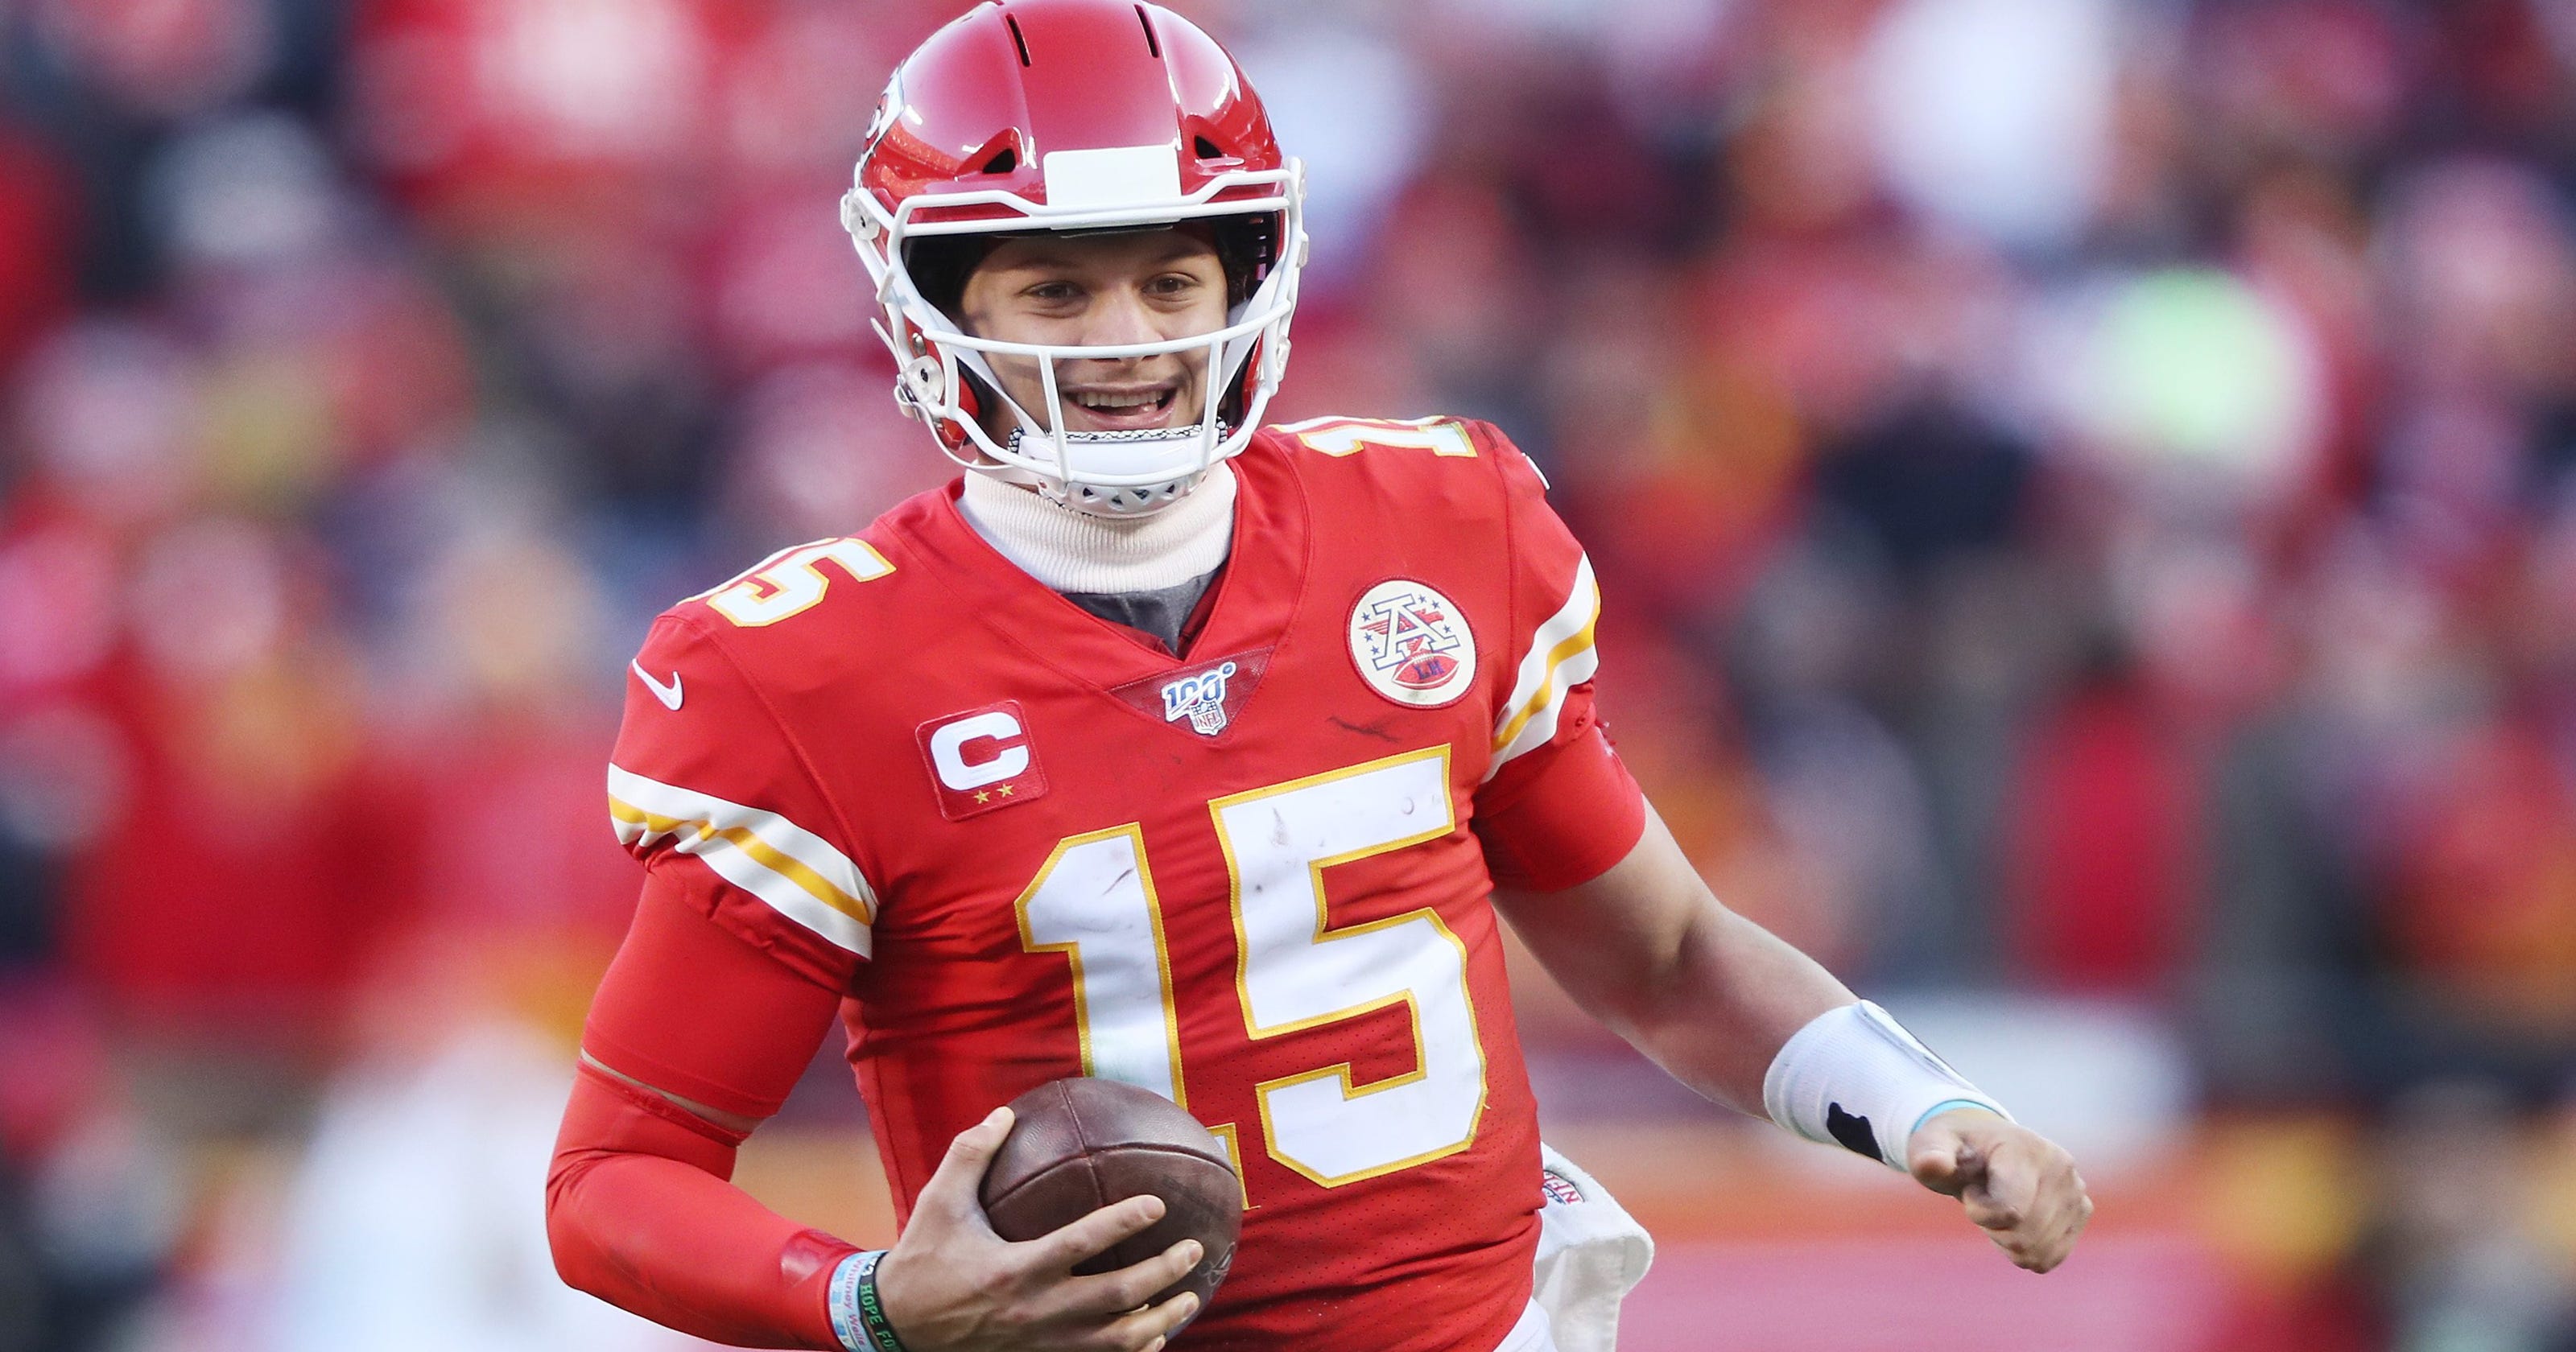 Patrick Mahomes was with Detroit Tigers before heading to Super Bowl